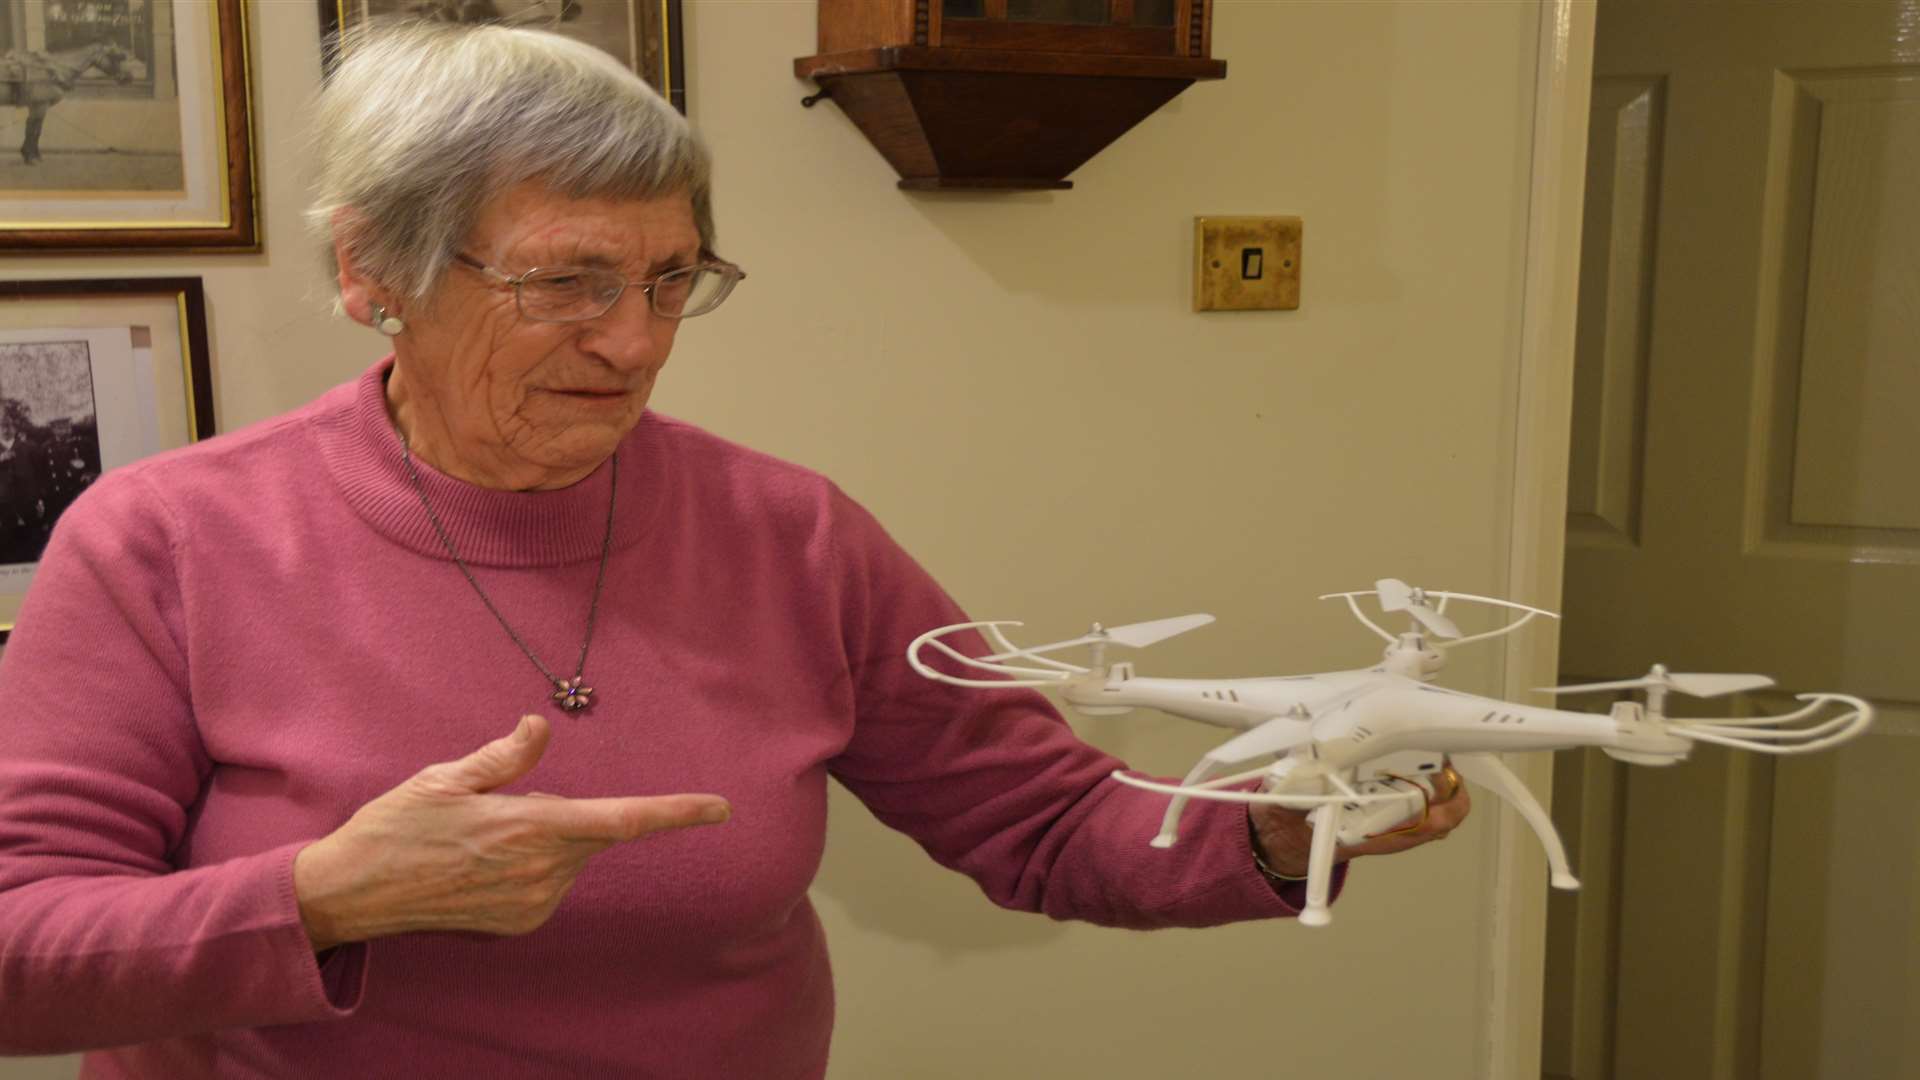 Connie Harrison and the drone she found